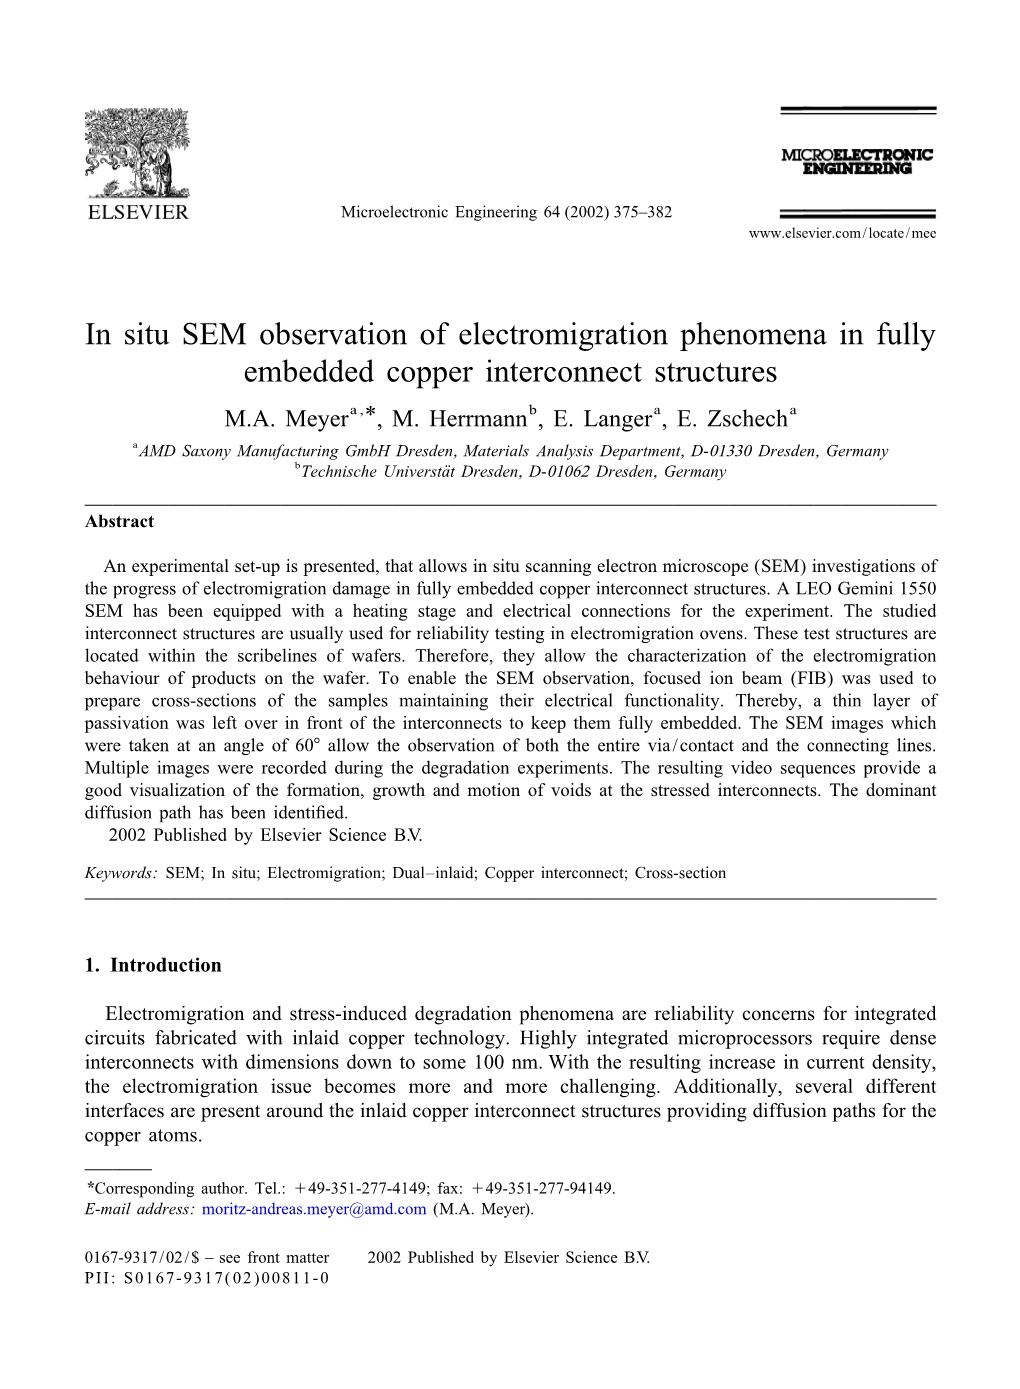 I N Situ SEM Observation of Electromigration Phenomena in Fully Embedded Copper Interconnect Structures M.A